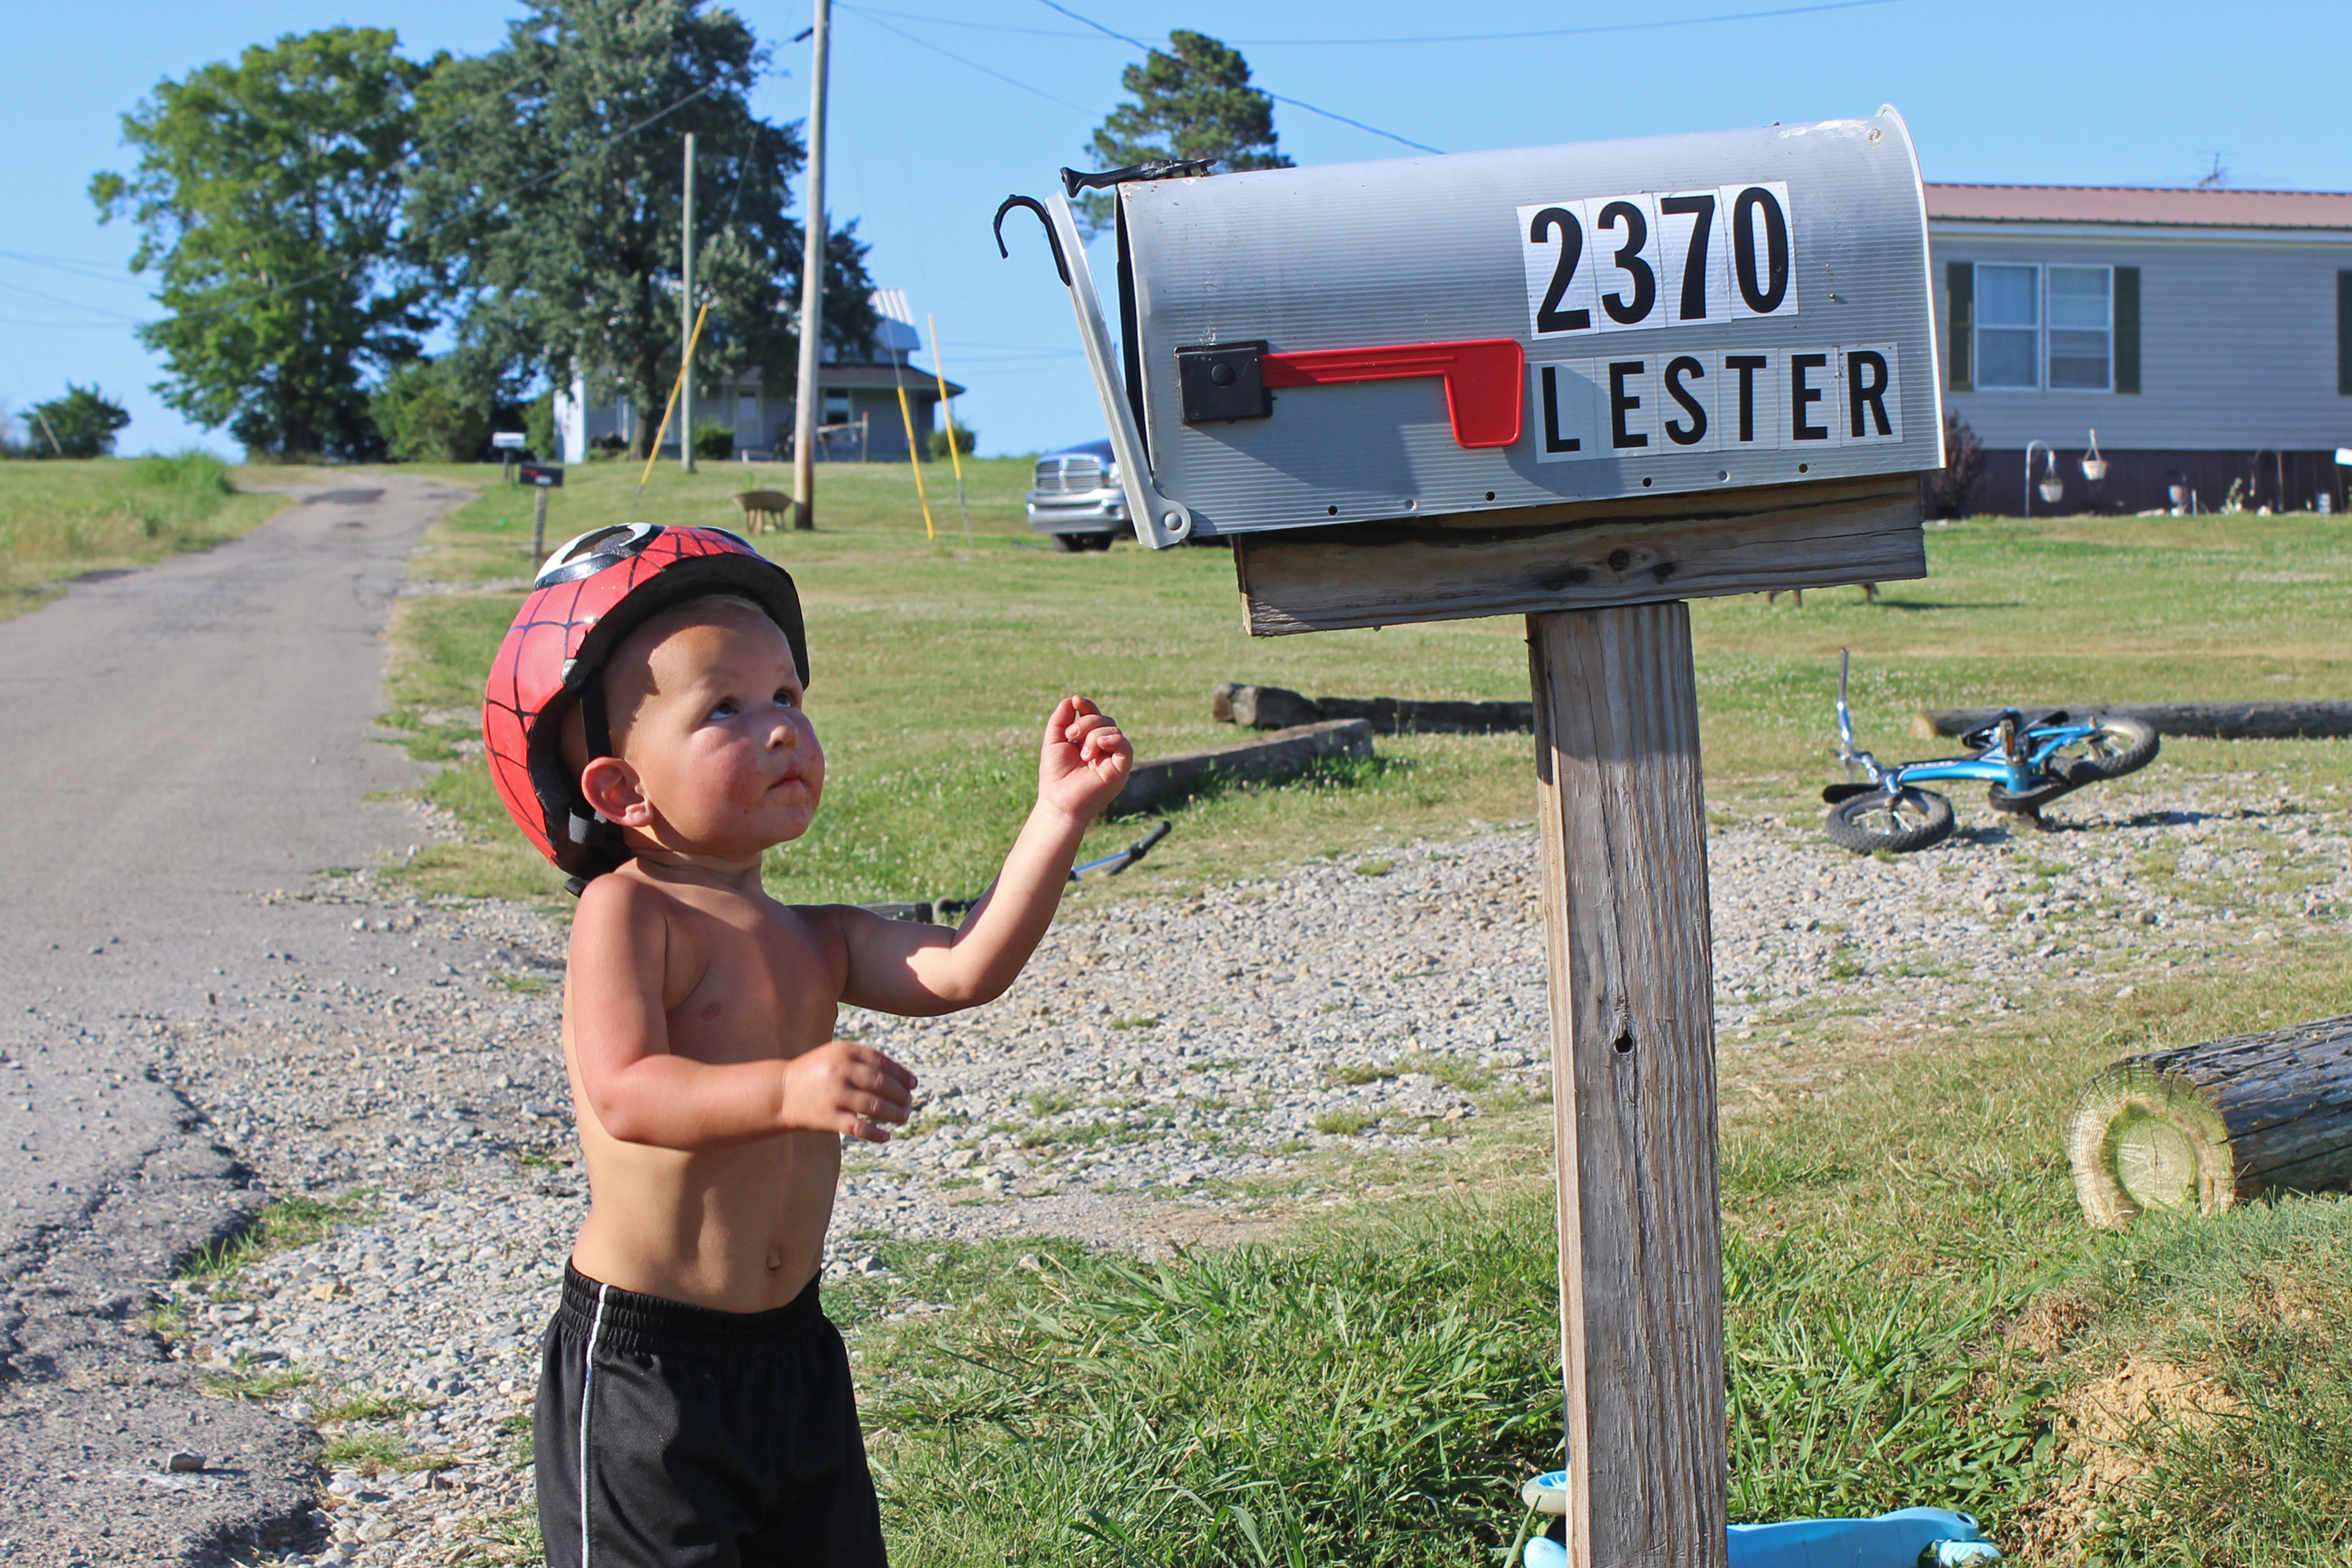 A photo shows Memphis Lester looking up at a mailbox. The mailbox has the house numbers and family's name on it.